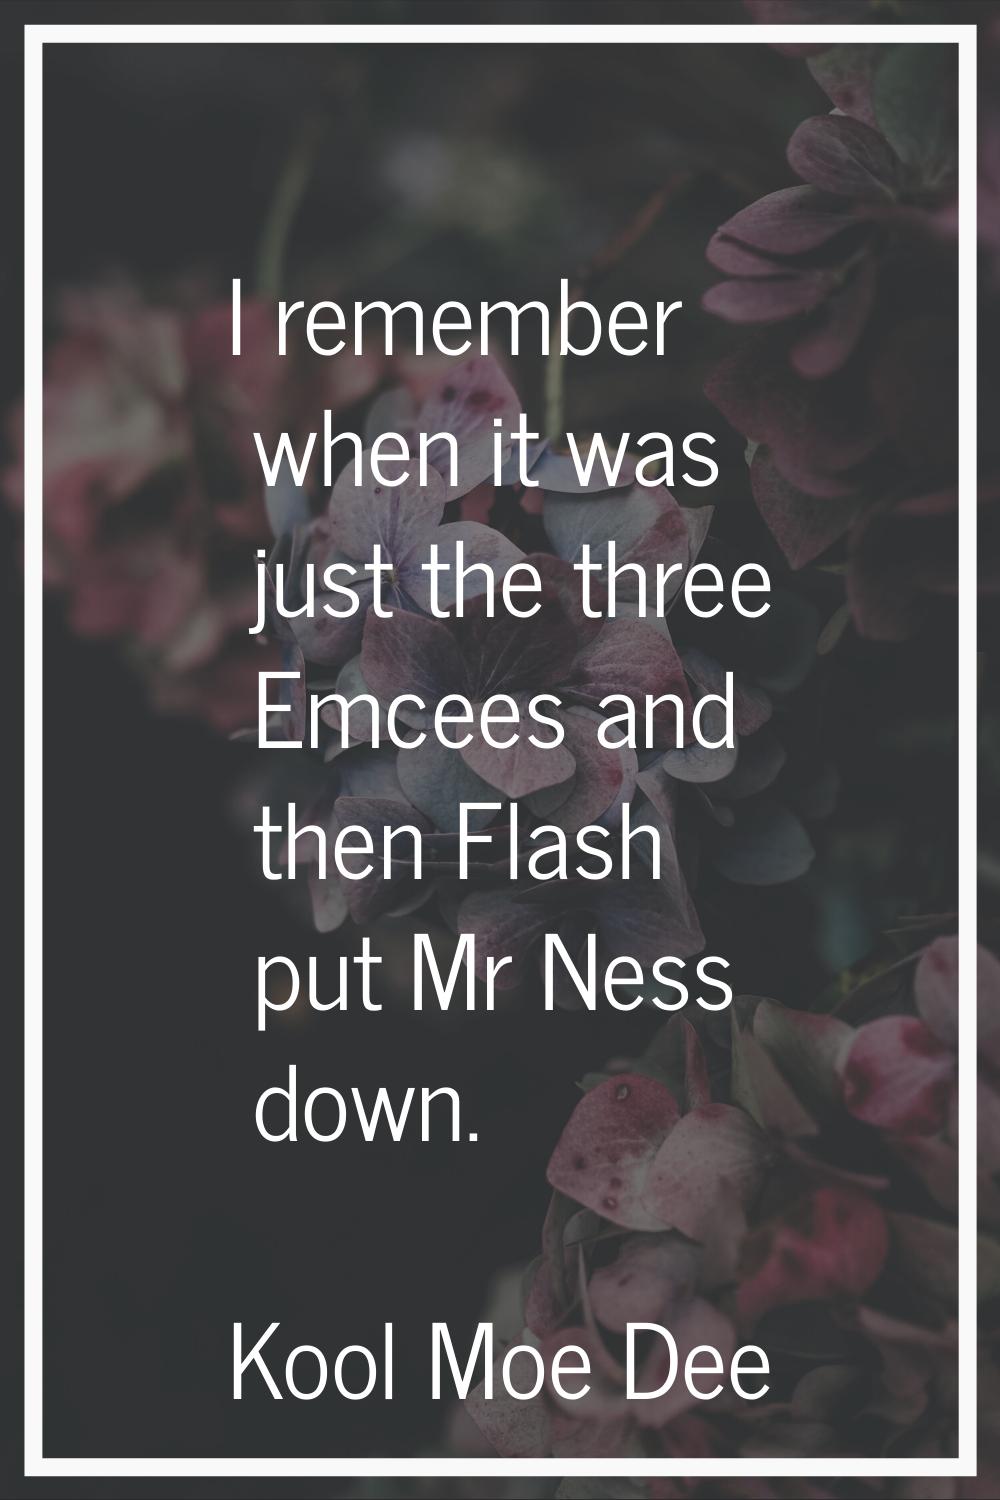 I remember when it was just the three Emcees and then Flash put Mr Ness down.